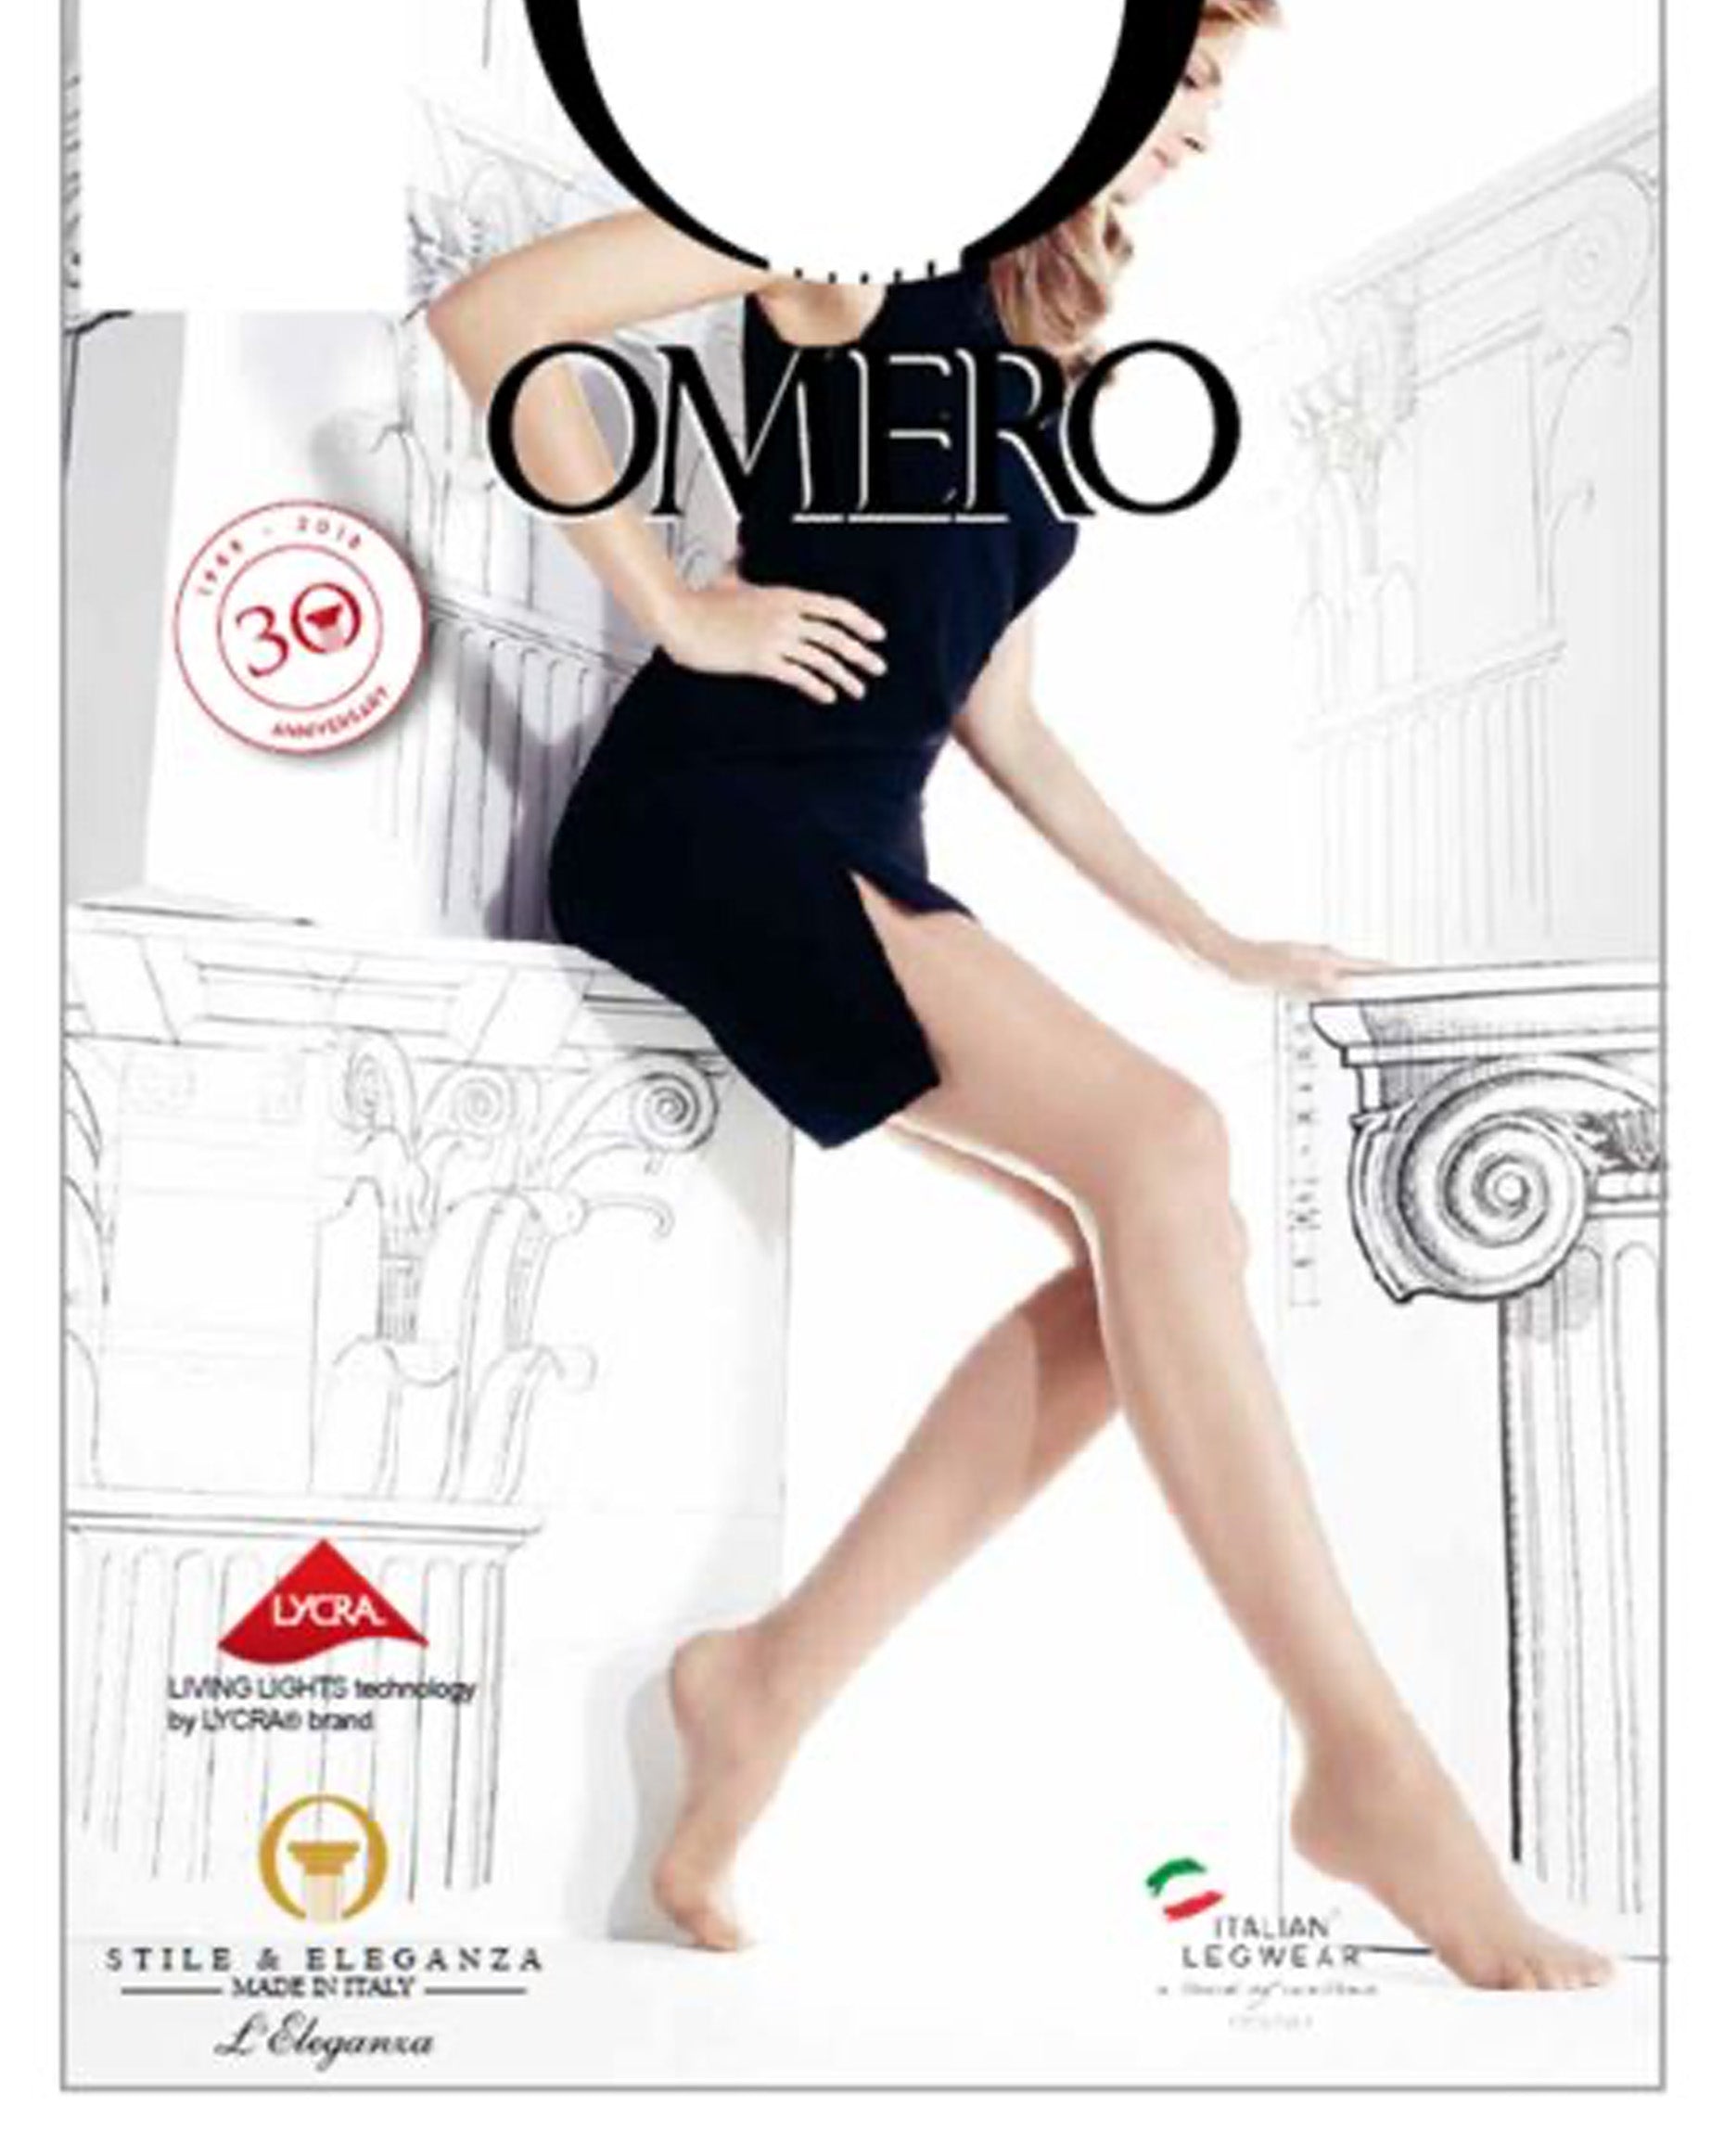 Omero Efira 20 Collant Pack - Classic sheer cream tights with a sheer body, flat seams, cotton gusset and comfort waistband.